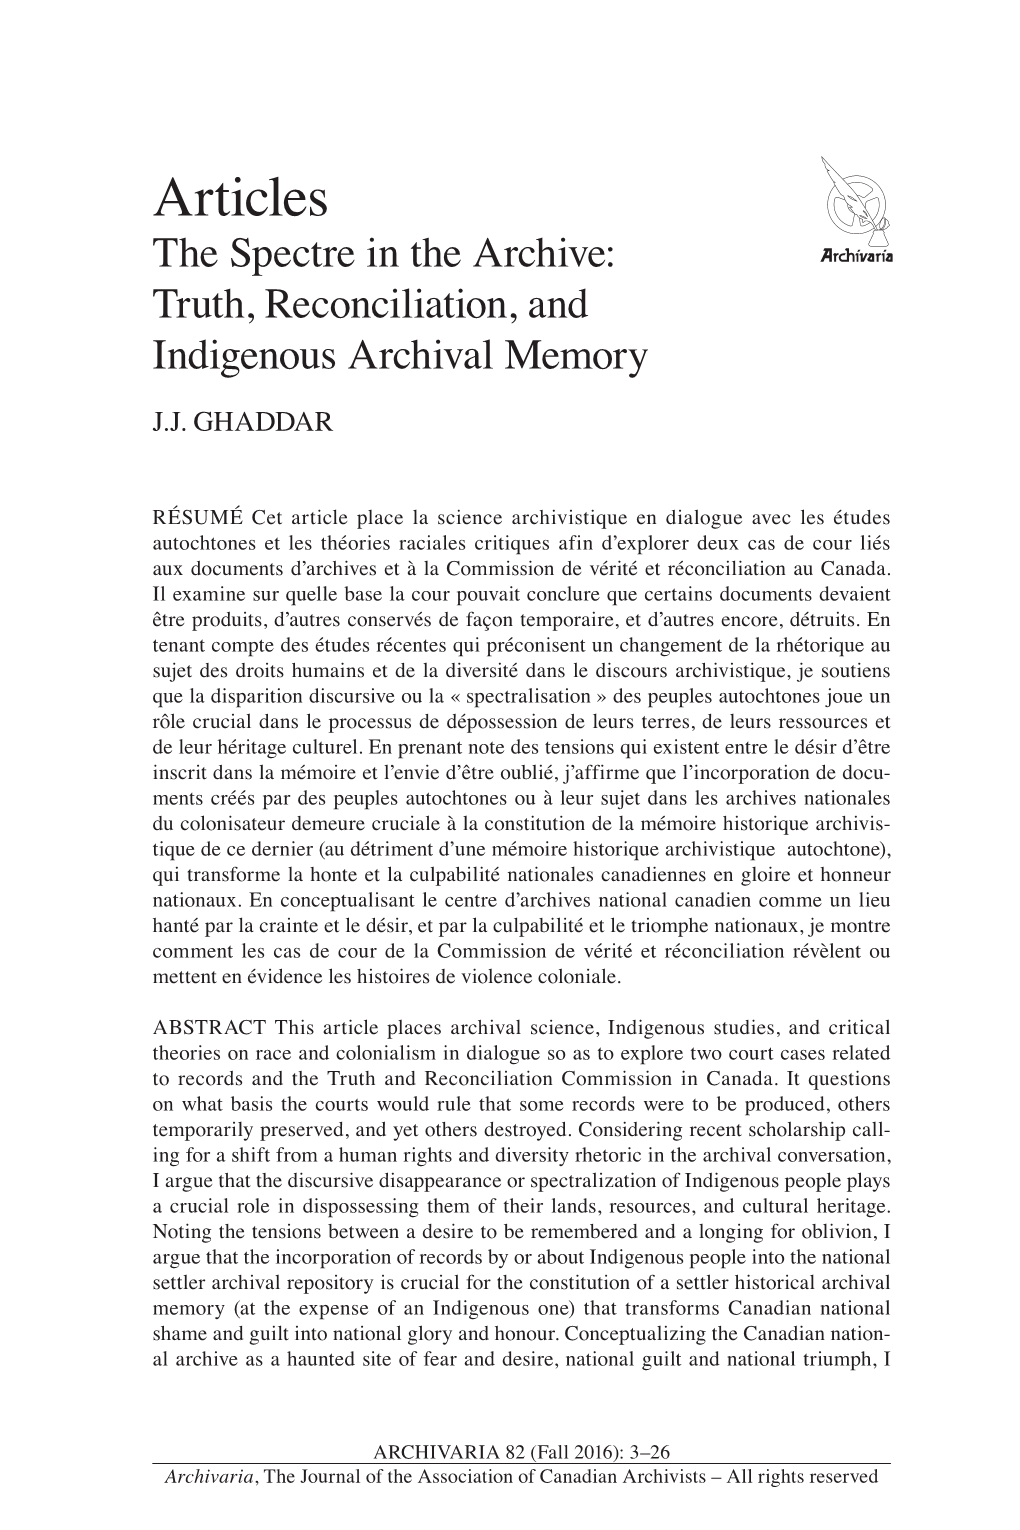 Articles the Spectre in the Archive: Truth, Reconciliation, and Indigenous Archival Memory J.J